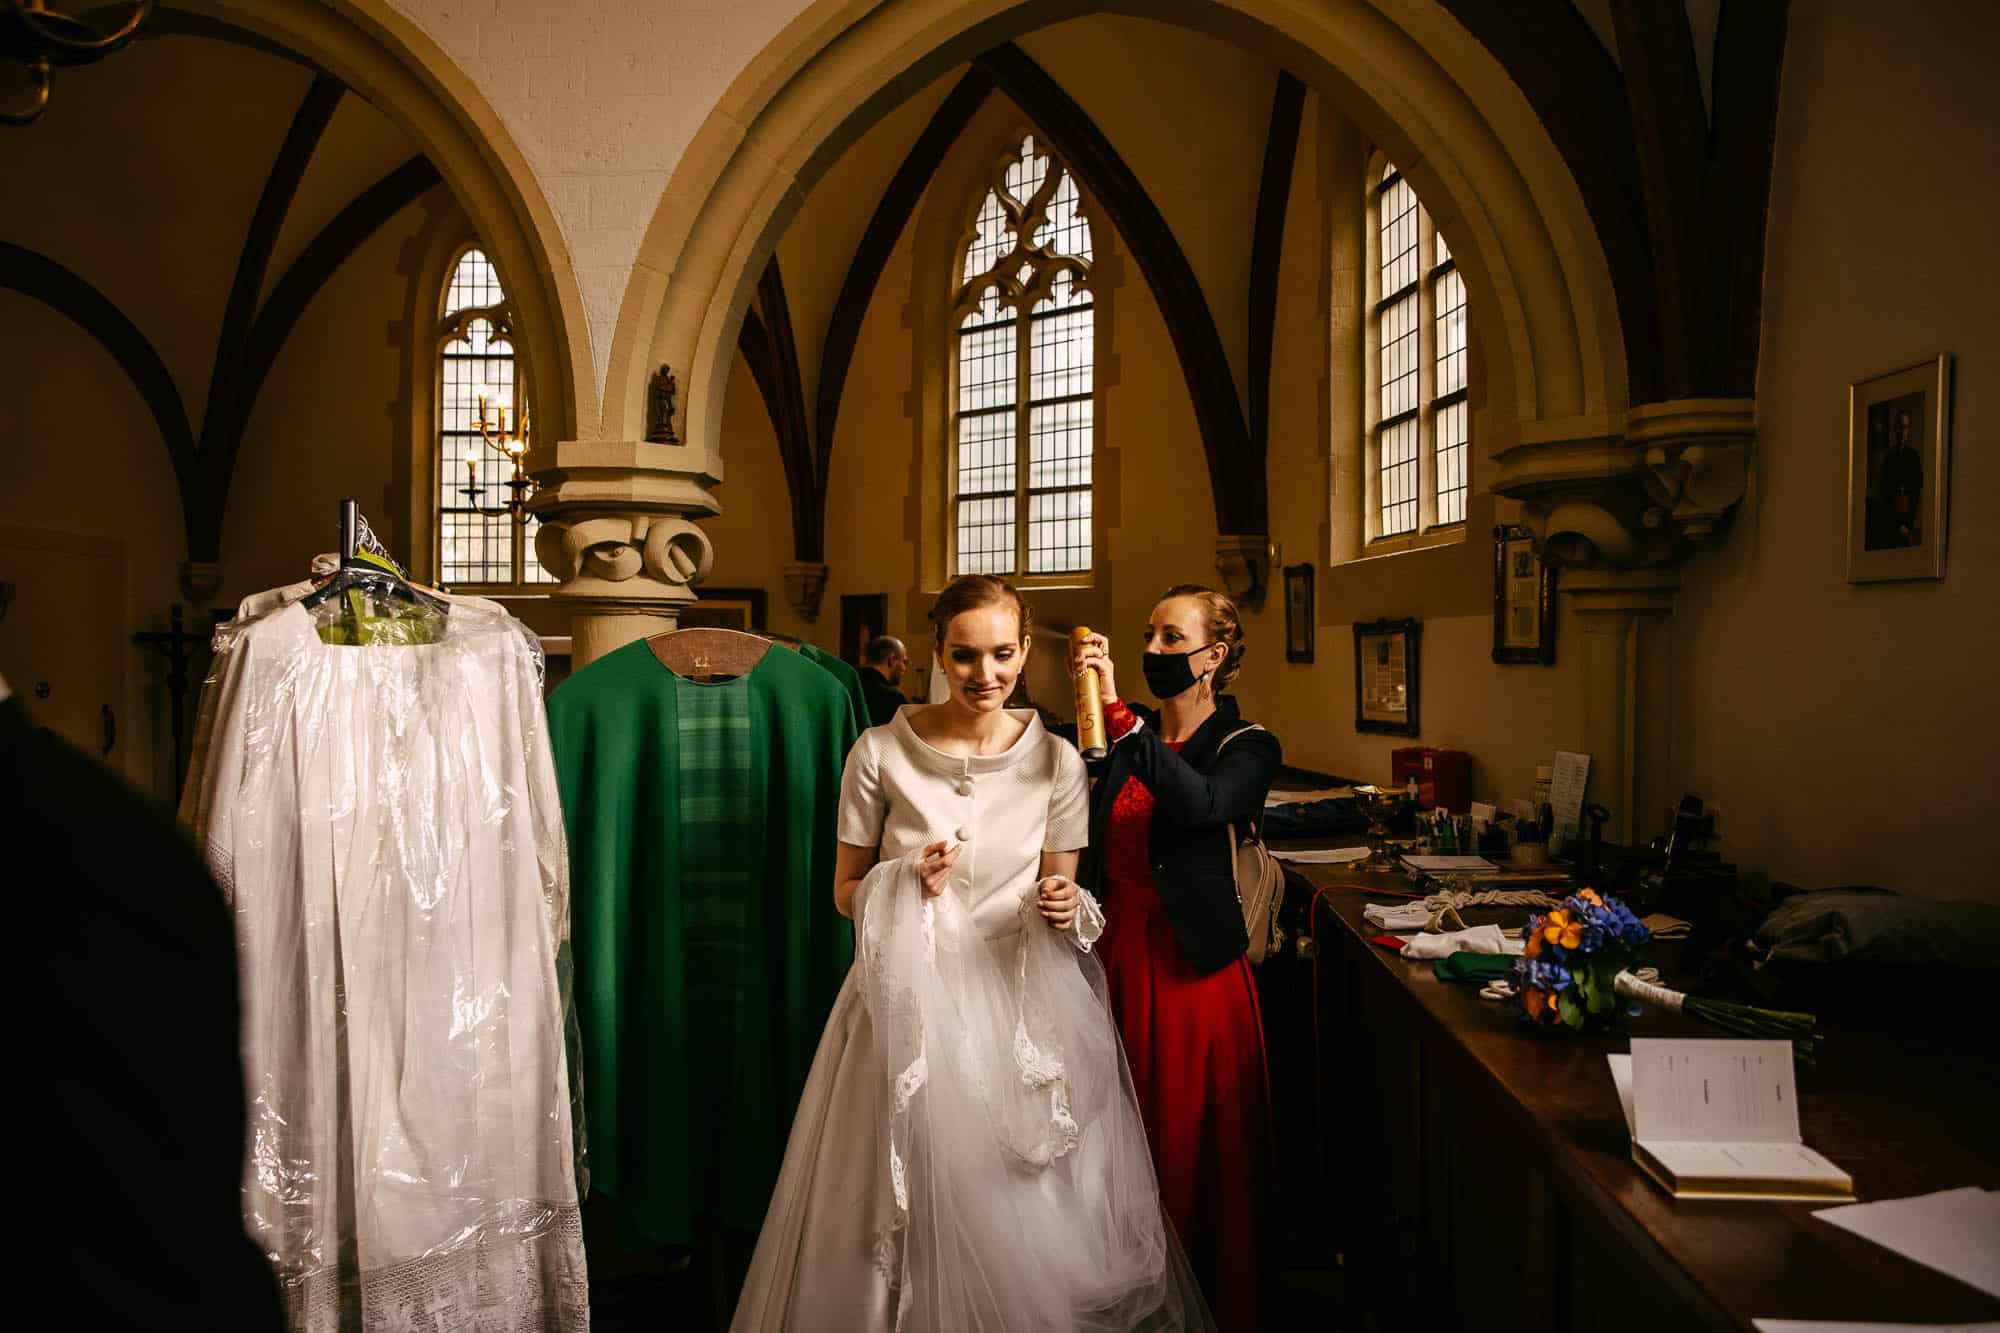 The master of ceremonies helps the bride get ready in a church.